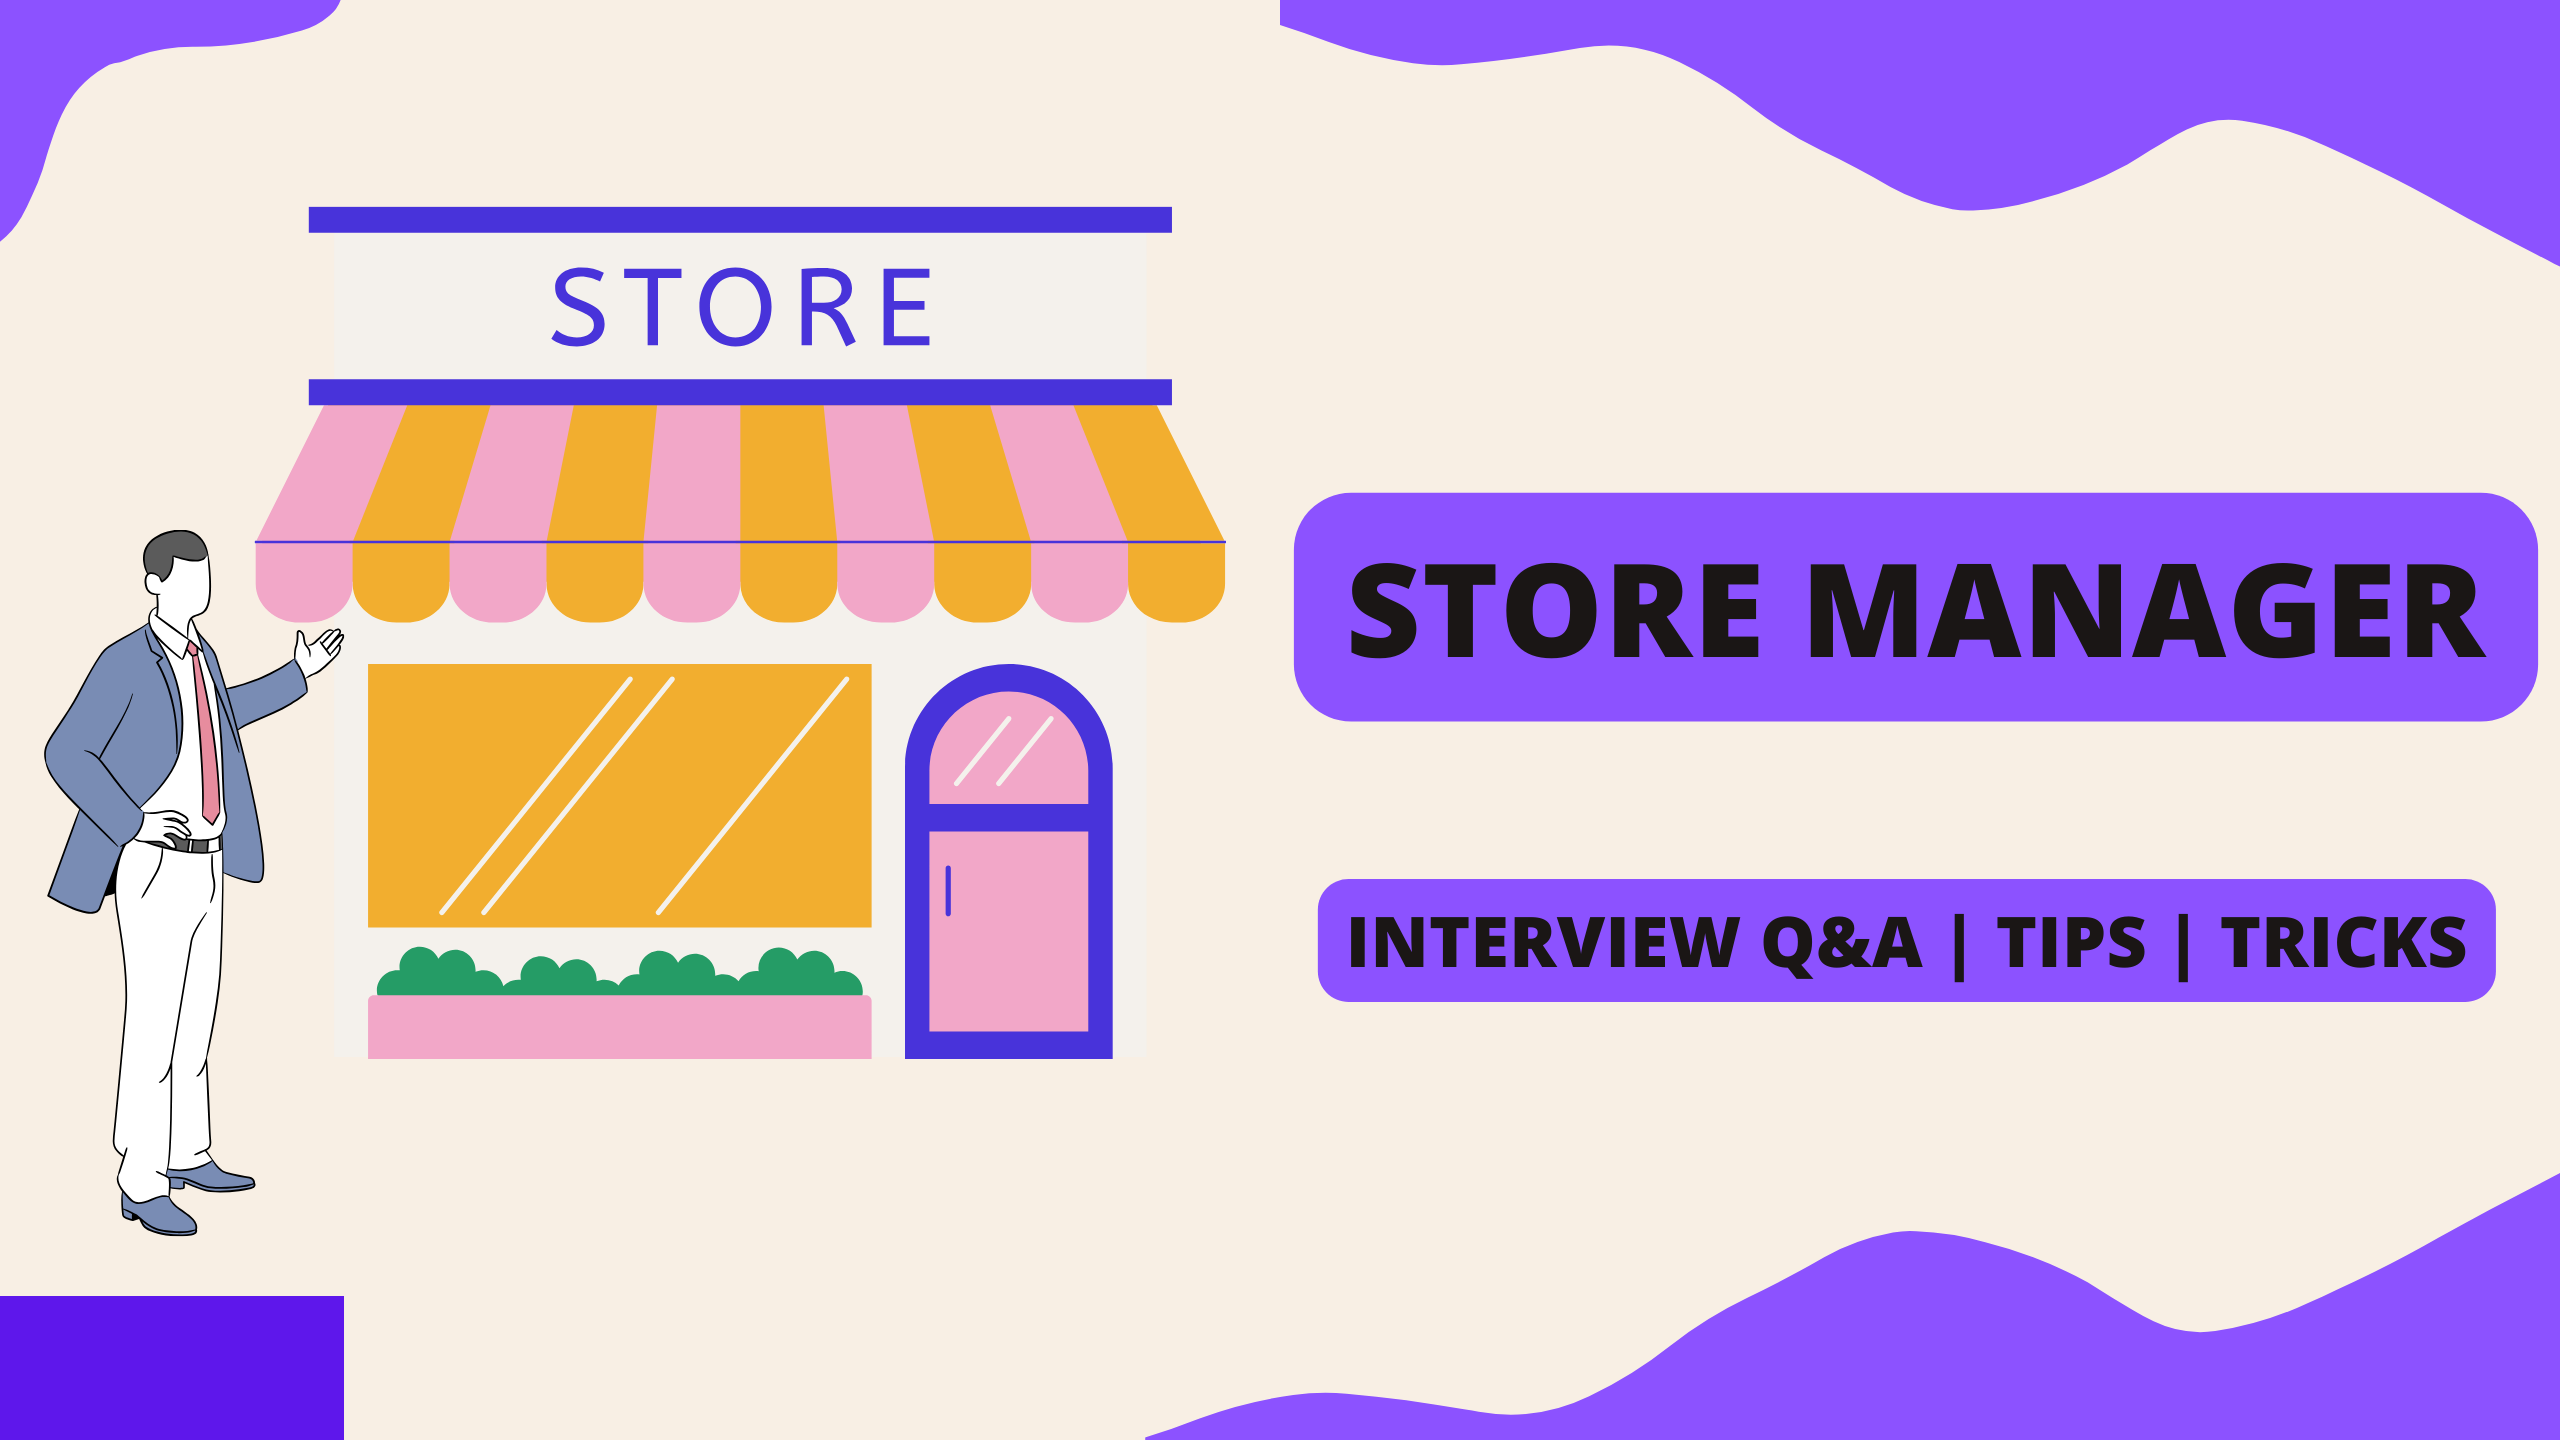 How to Prepare for the Store Manager Interview in Africa? 25 Q&A with Answers